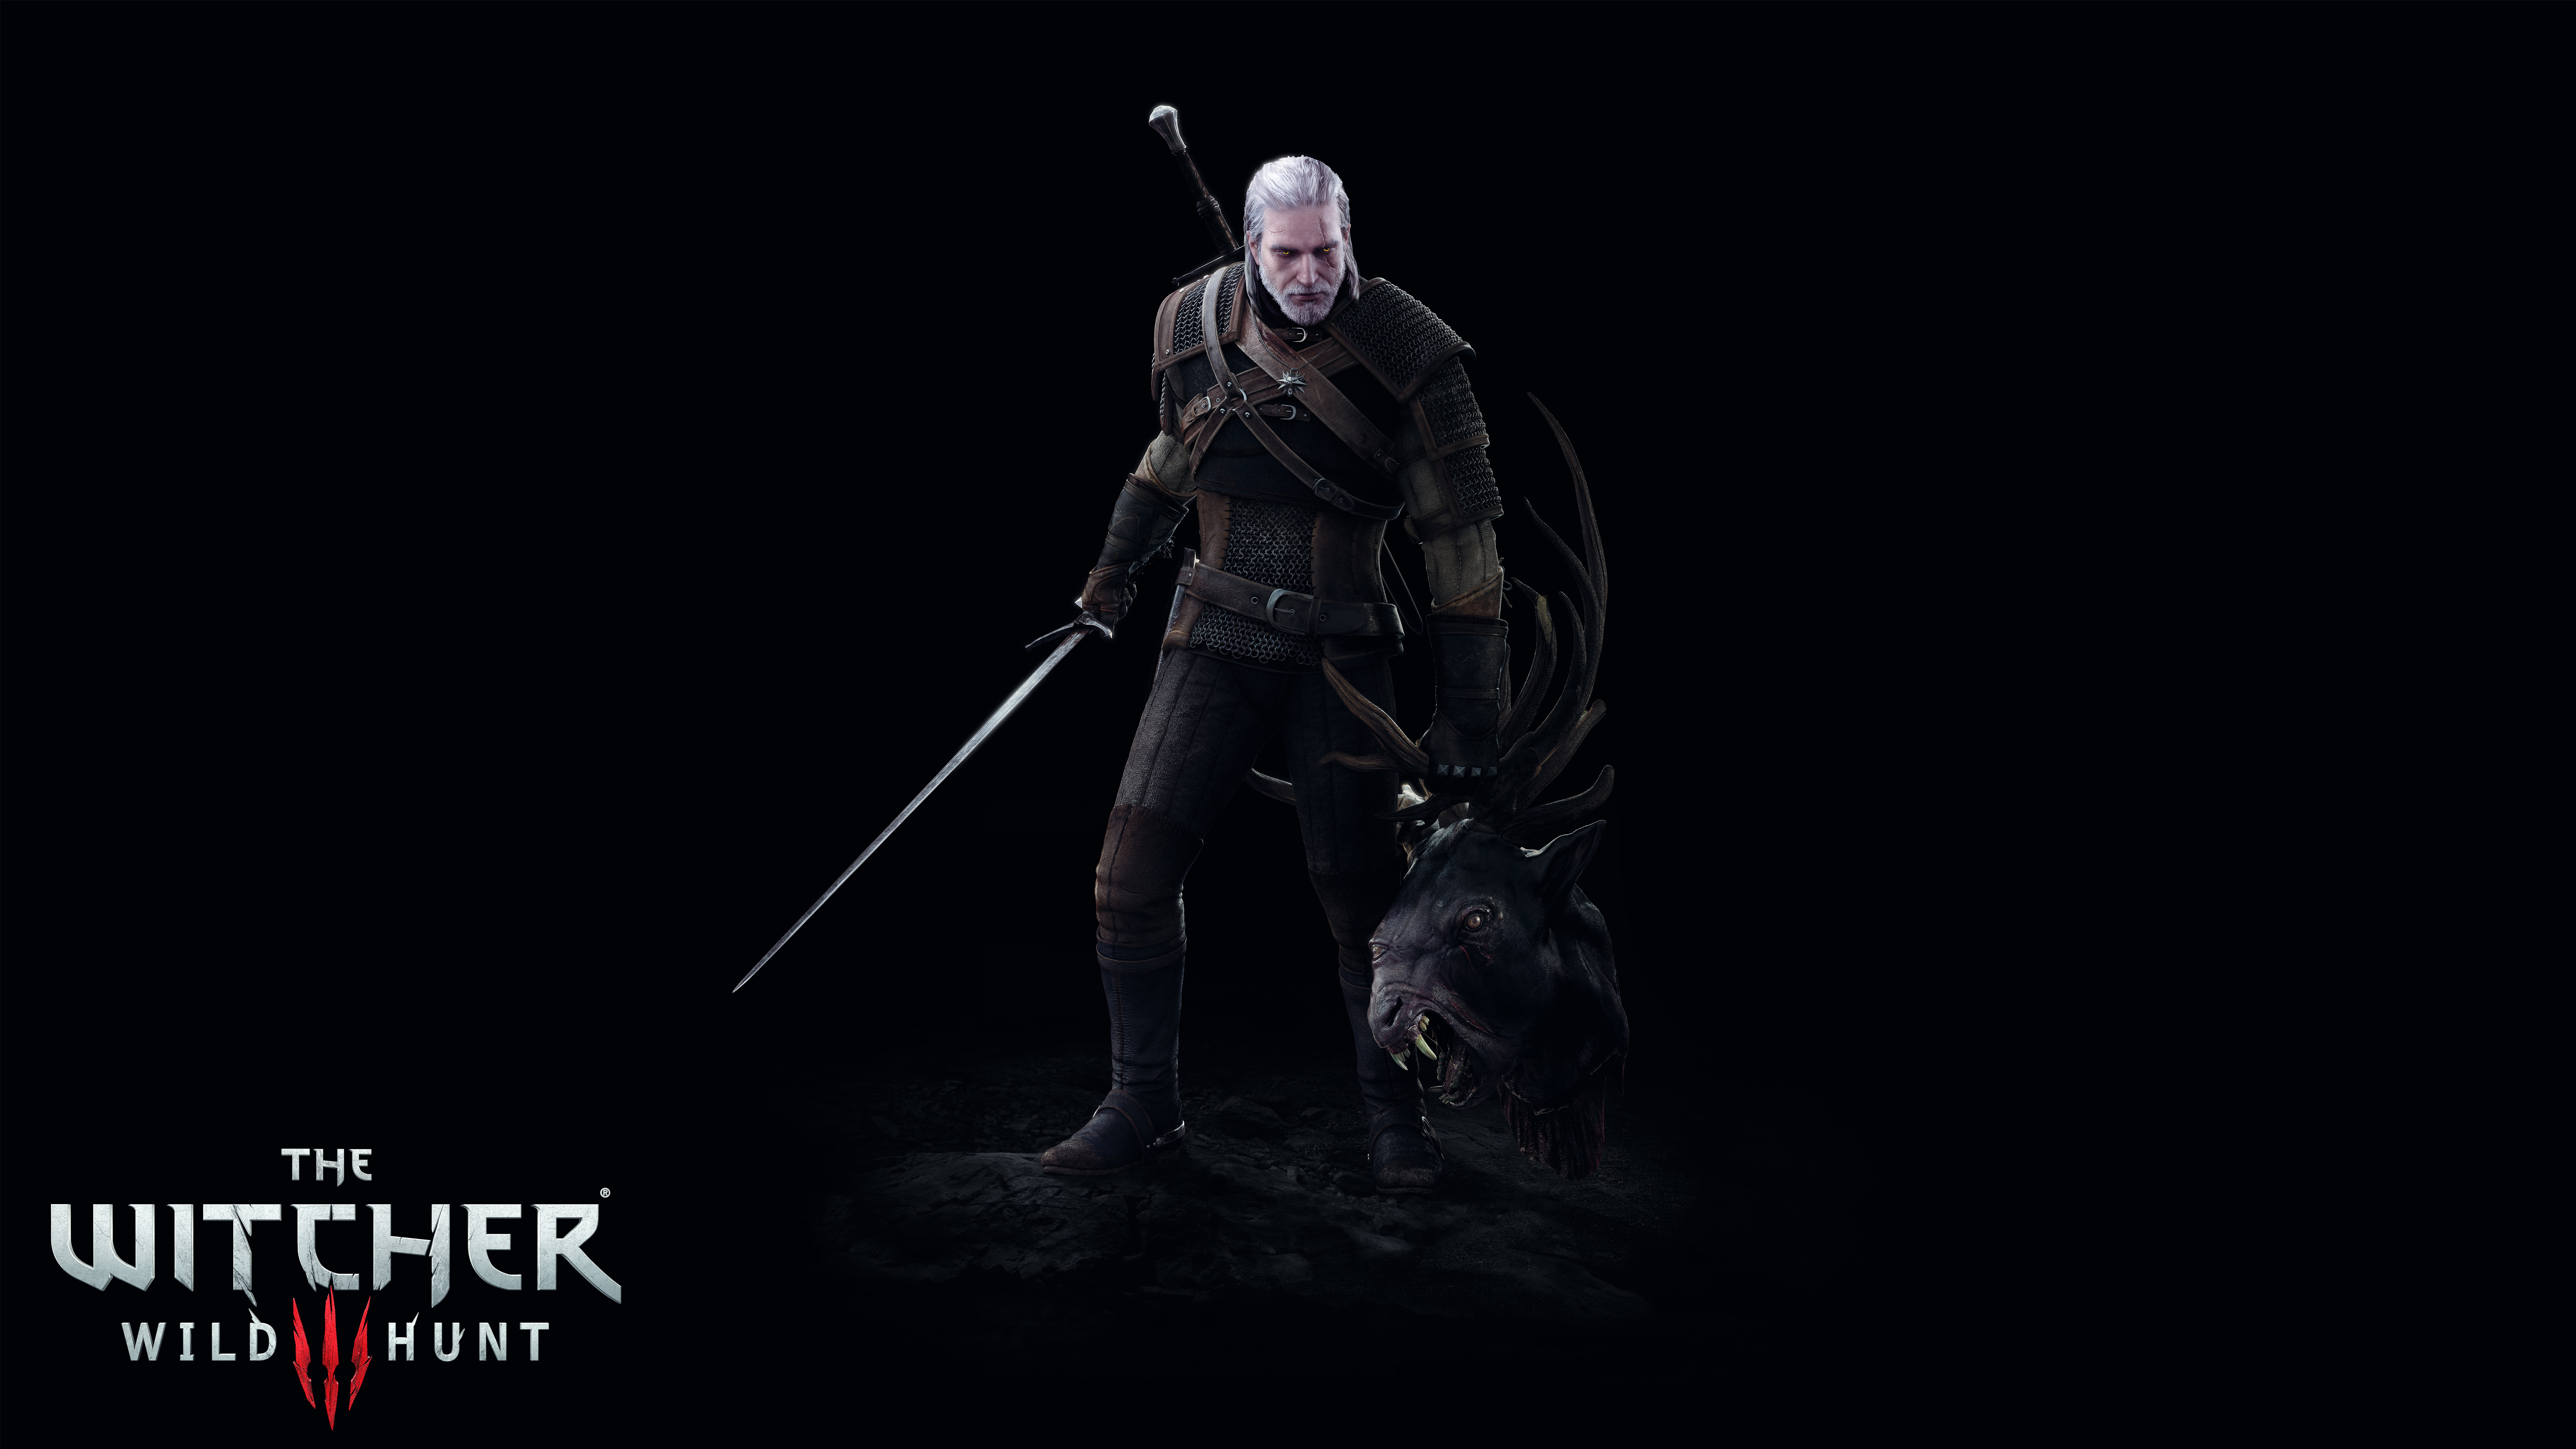 The Witcher 3 wallpapers, Pictures, Images